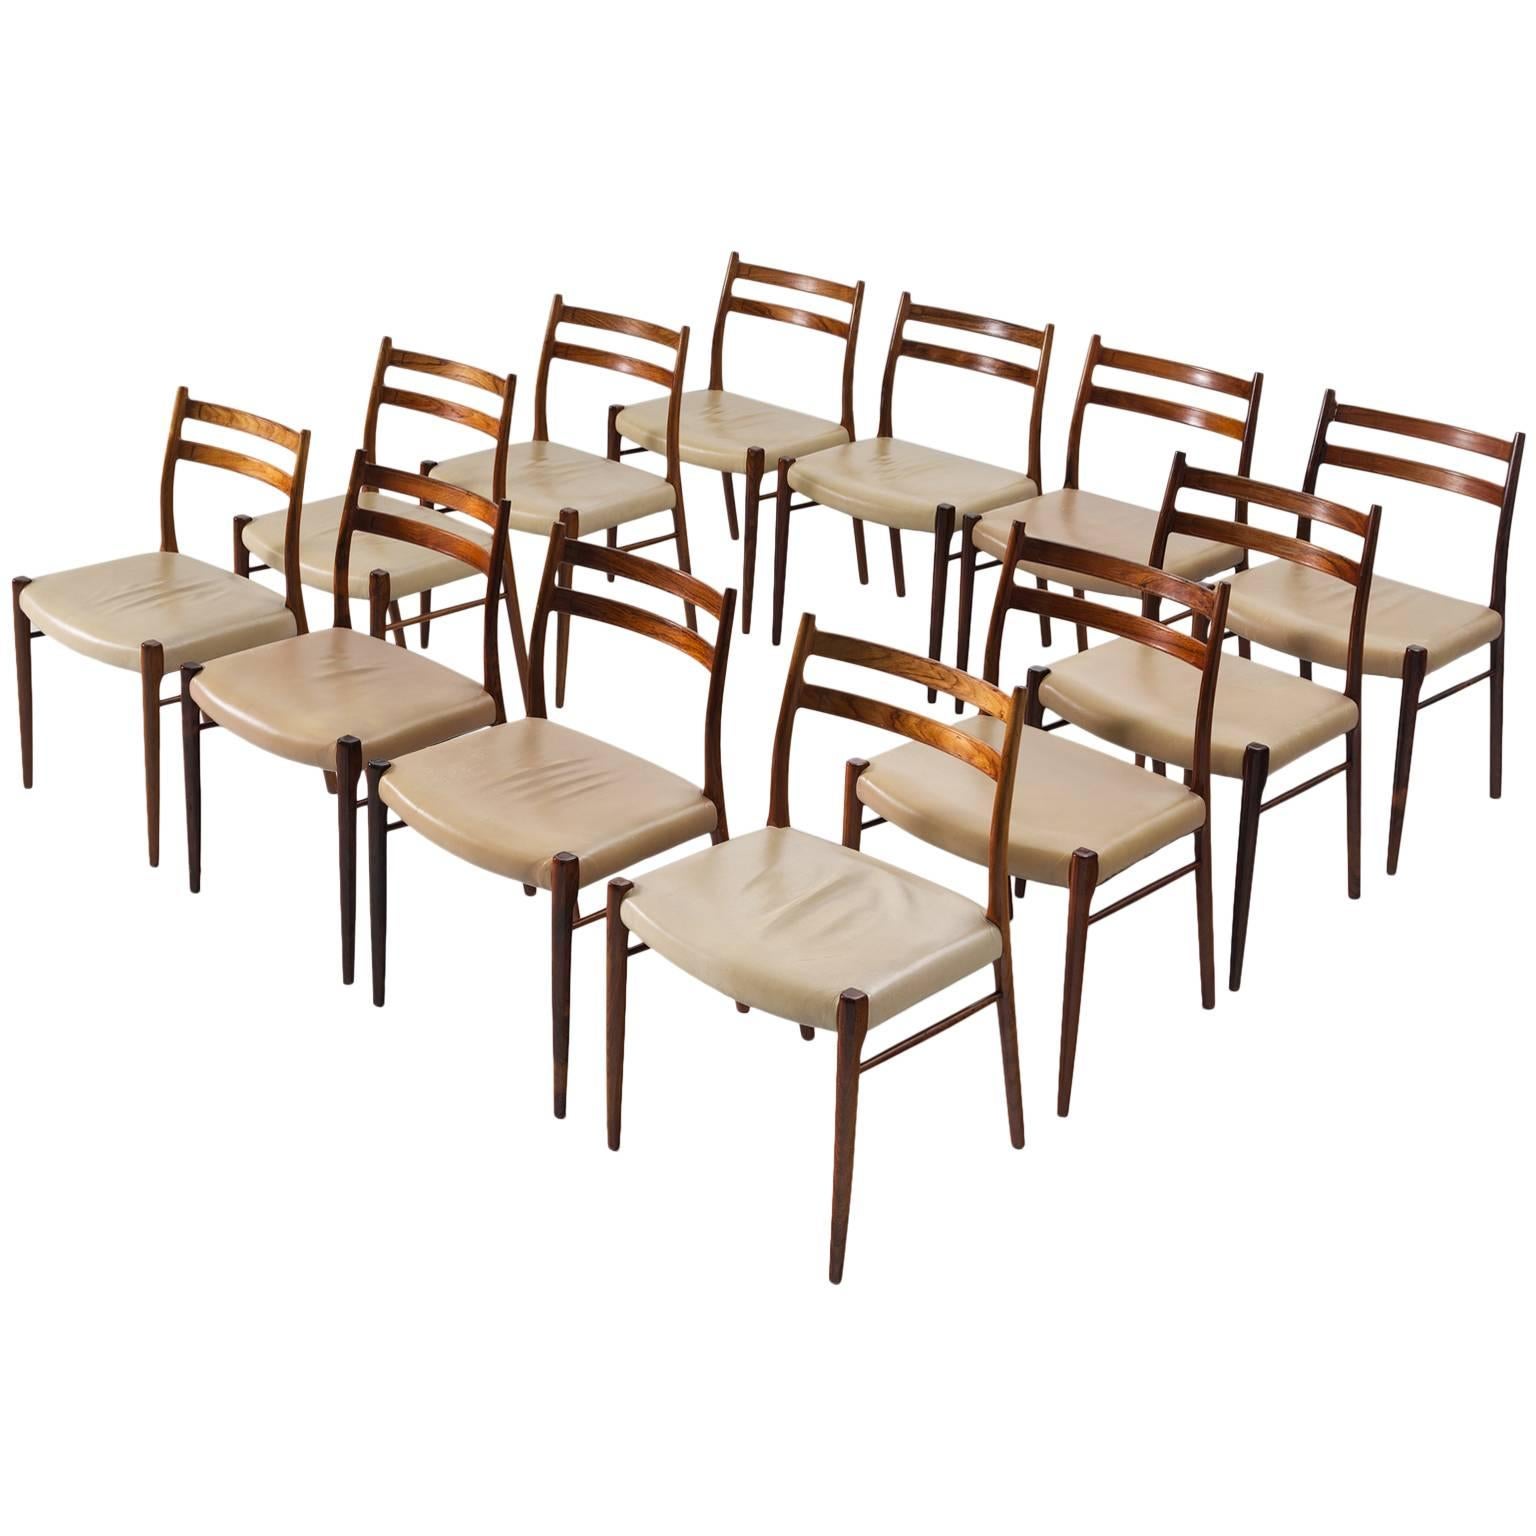 Arne Wahl Iversen Set of 12 Dining Chairs in Rosewood and Leather